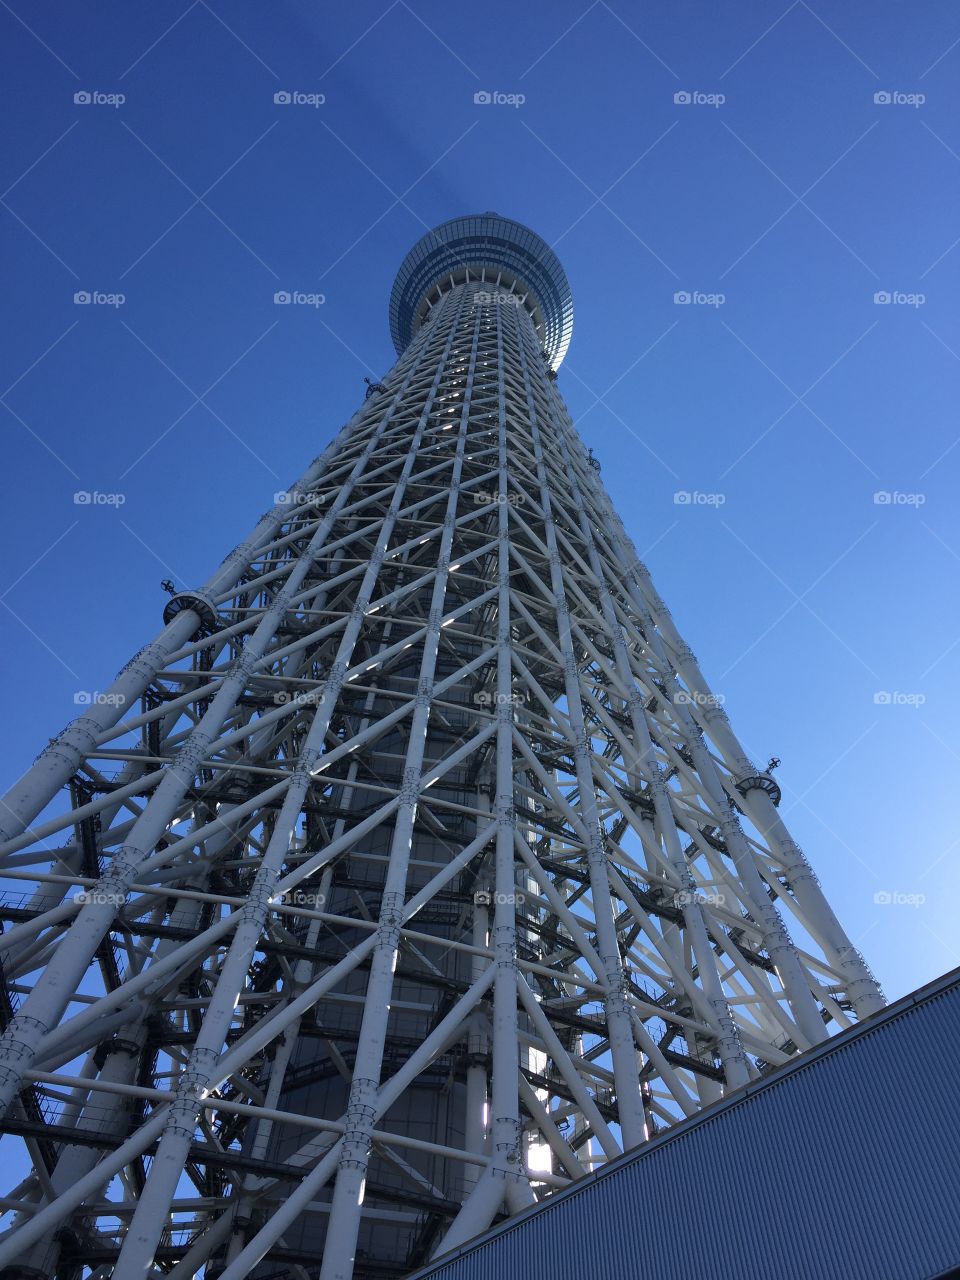 Sky tree, The tallest structure in Japan